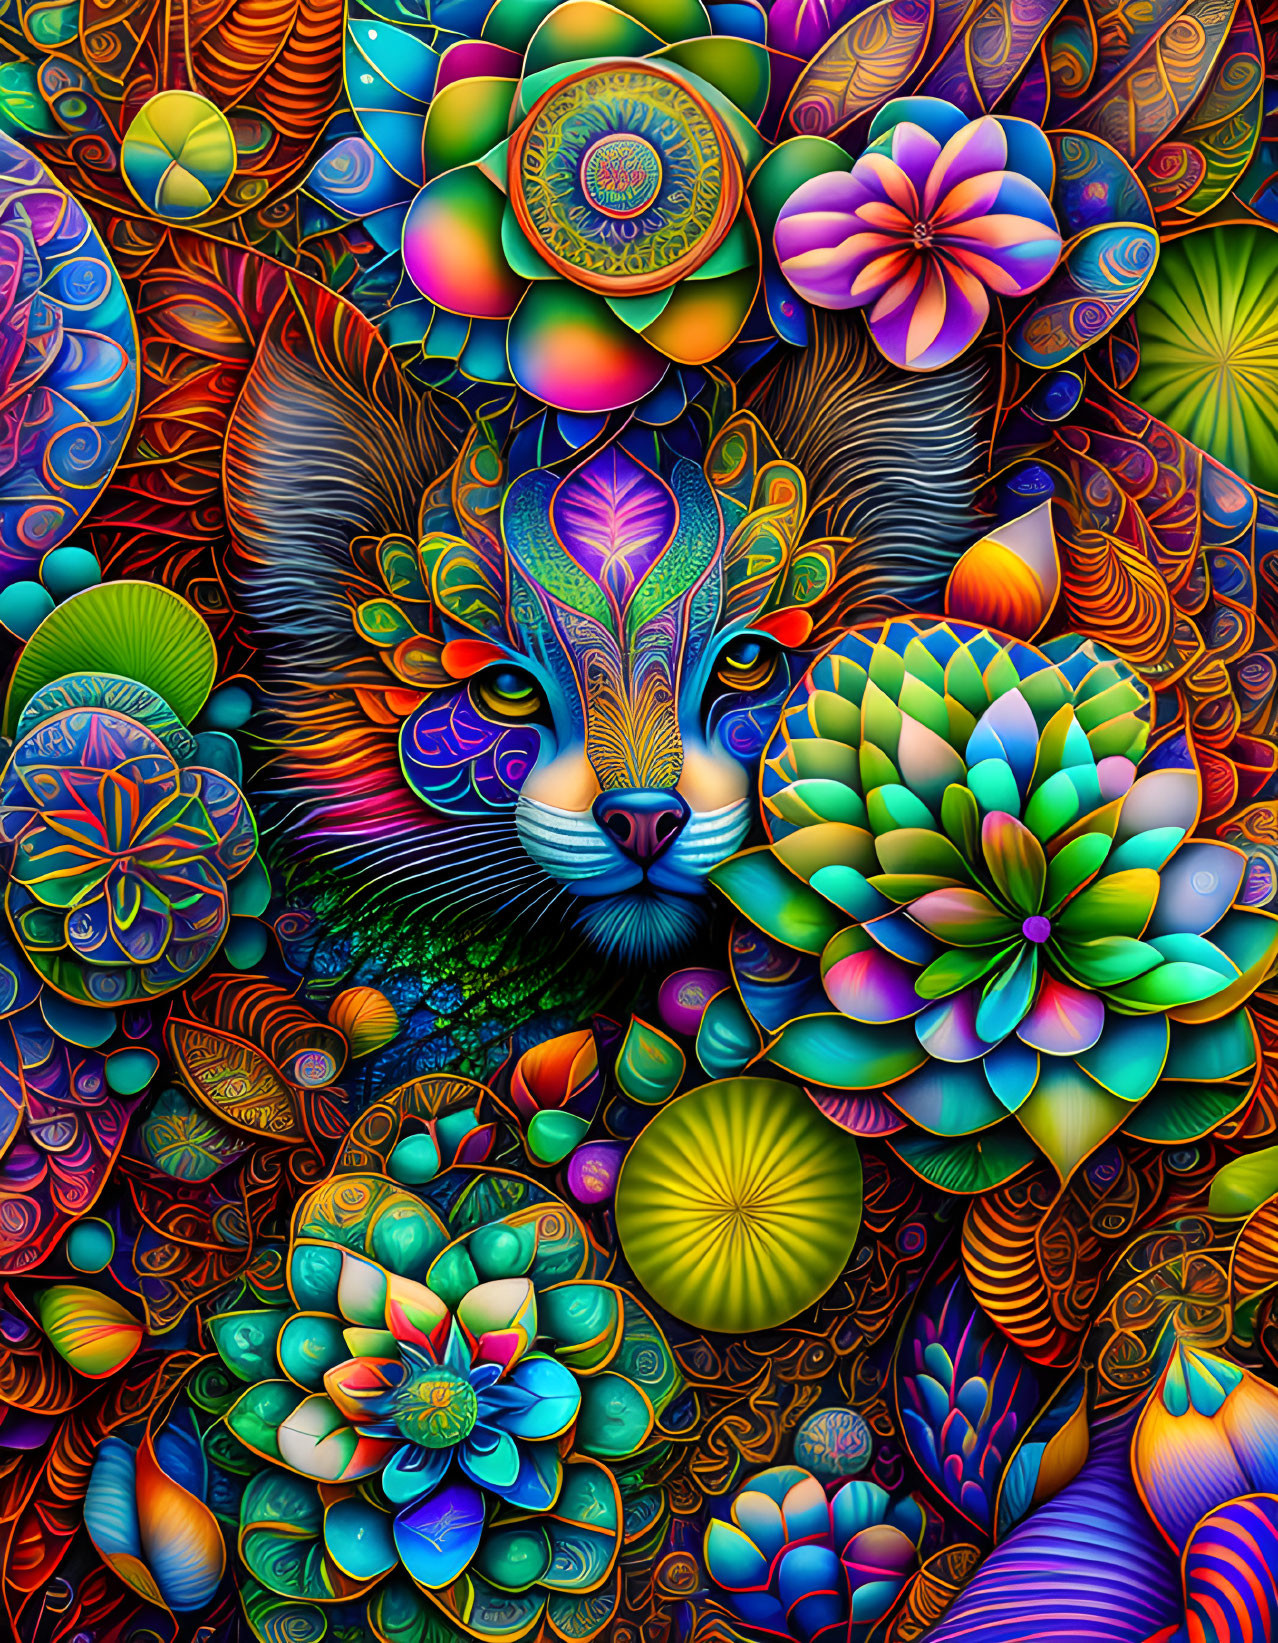 Colorful Psychedelic Cat Face with Floral Patterns